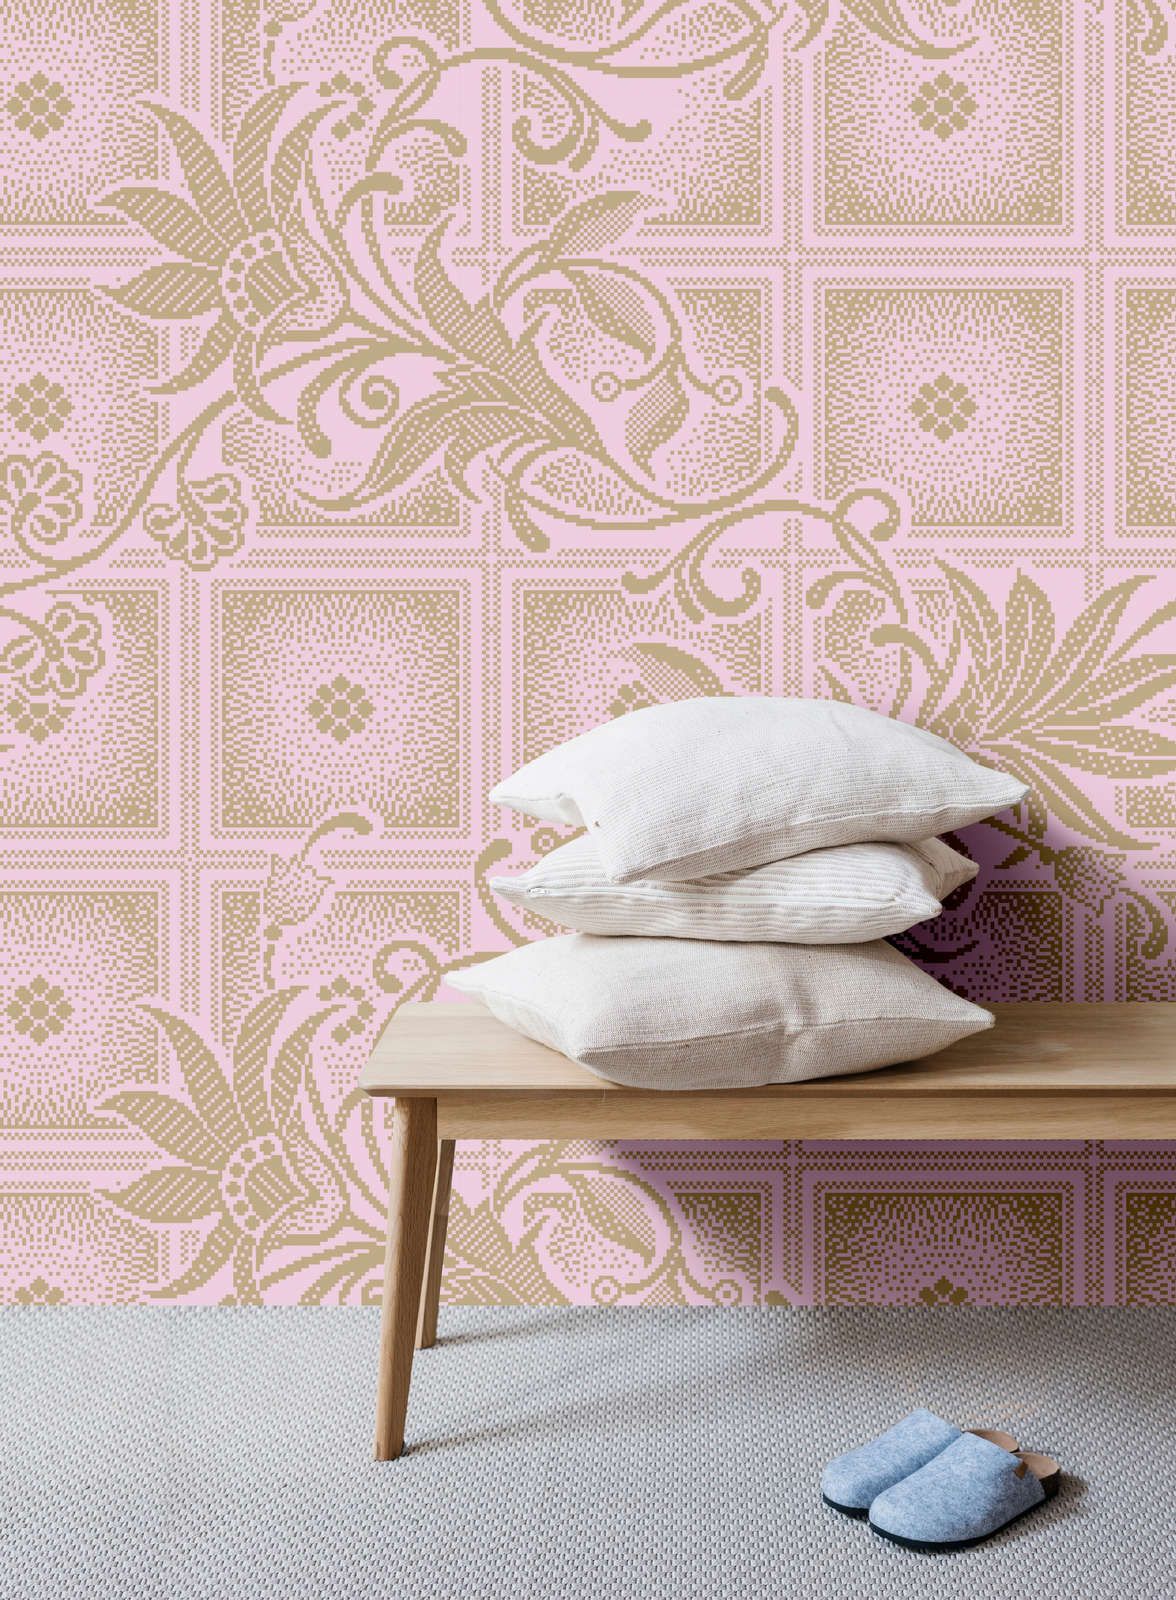             Photo wallpaper »vivian« - Pixel style squares with flowers - Pink | Light textured non-woven
        